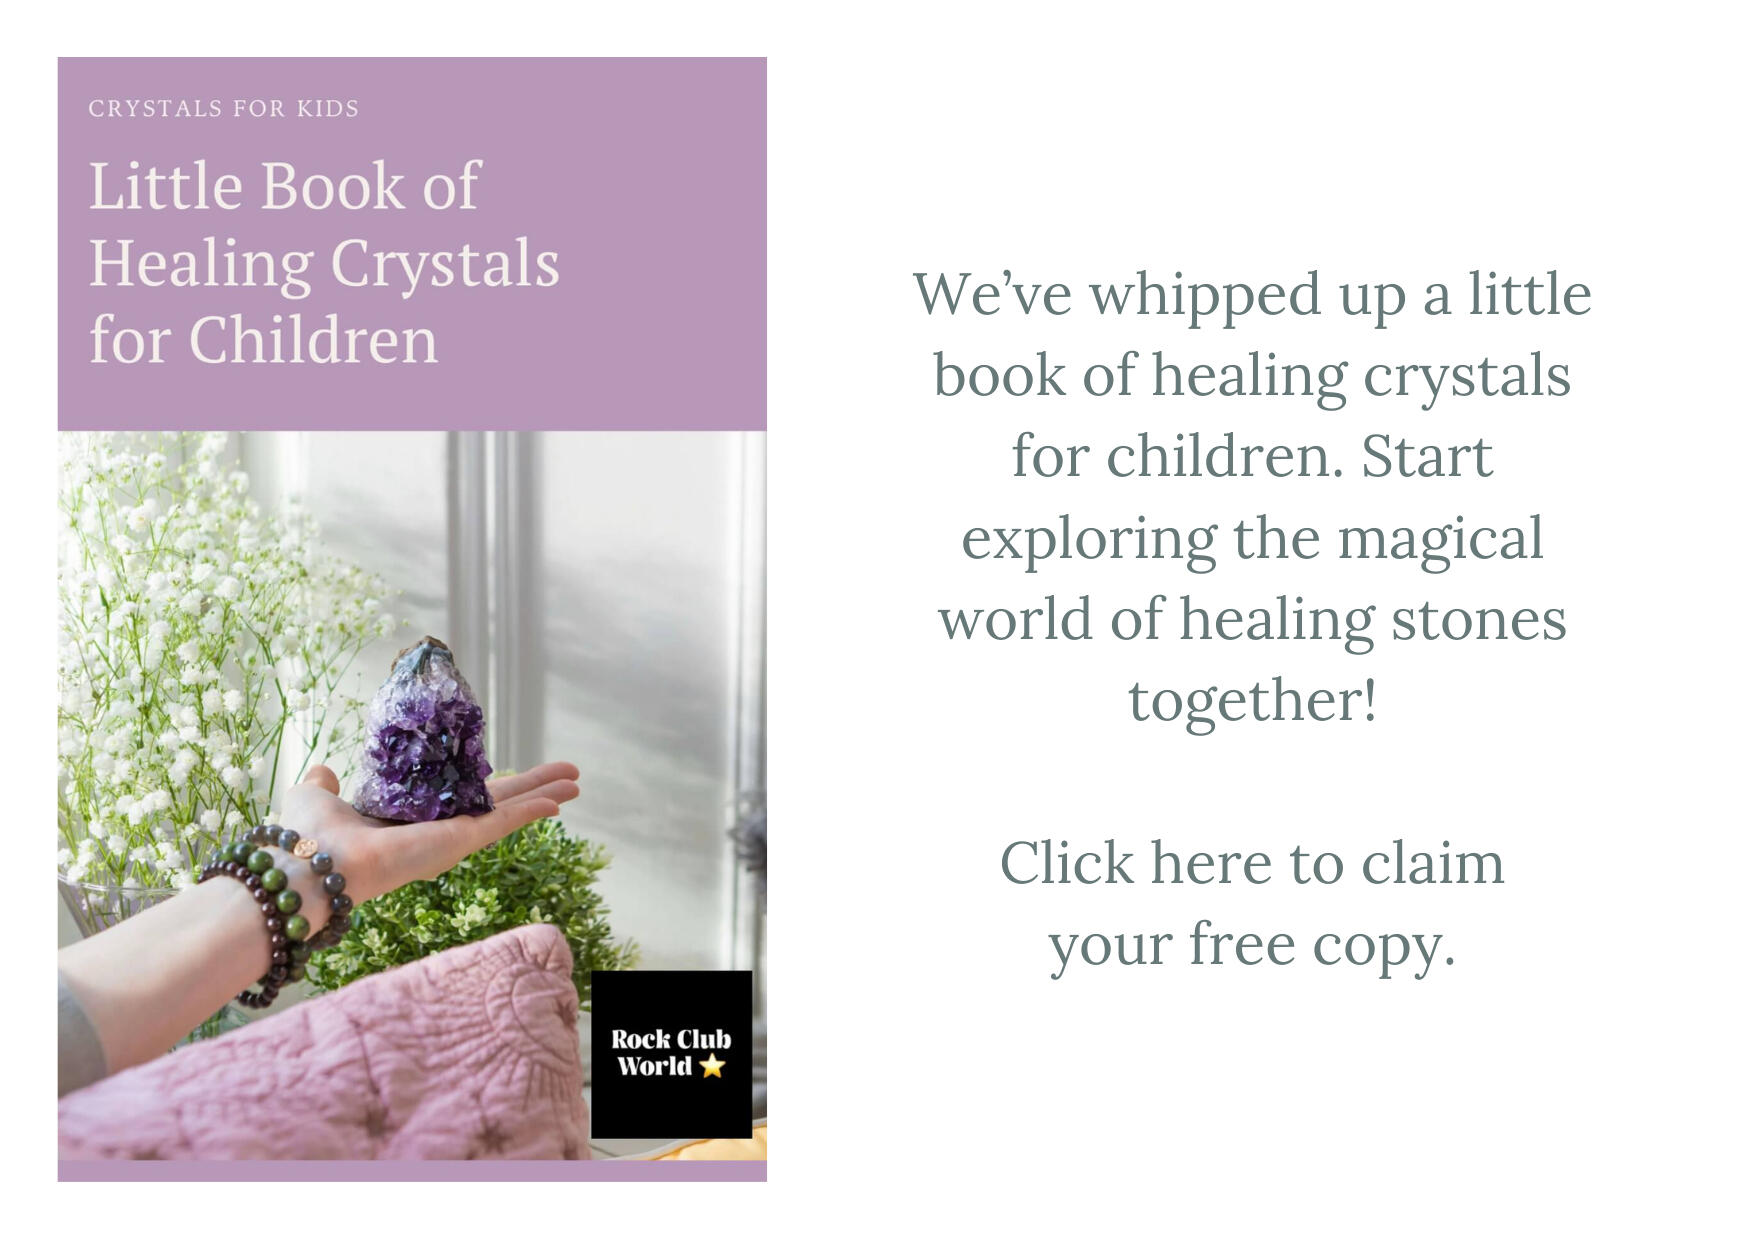 This is a photo of an Amethyst crystal with link to free book of healing crystals for children.